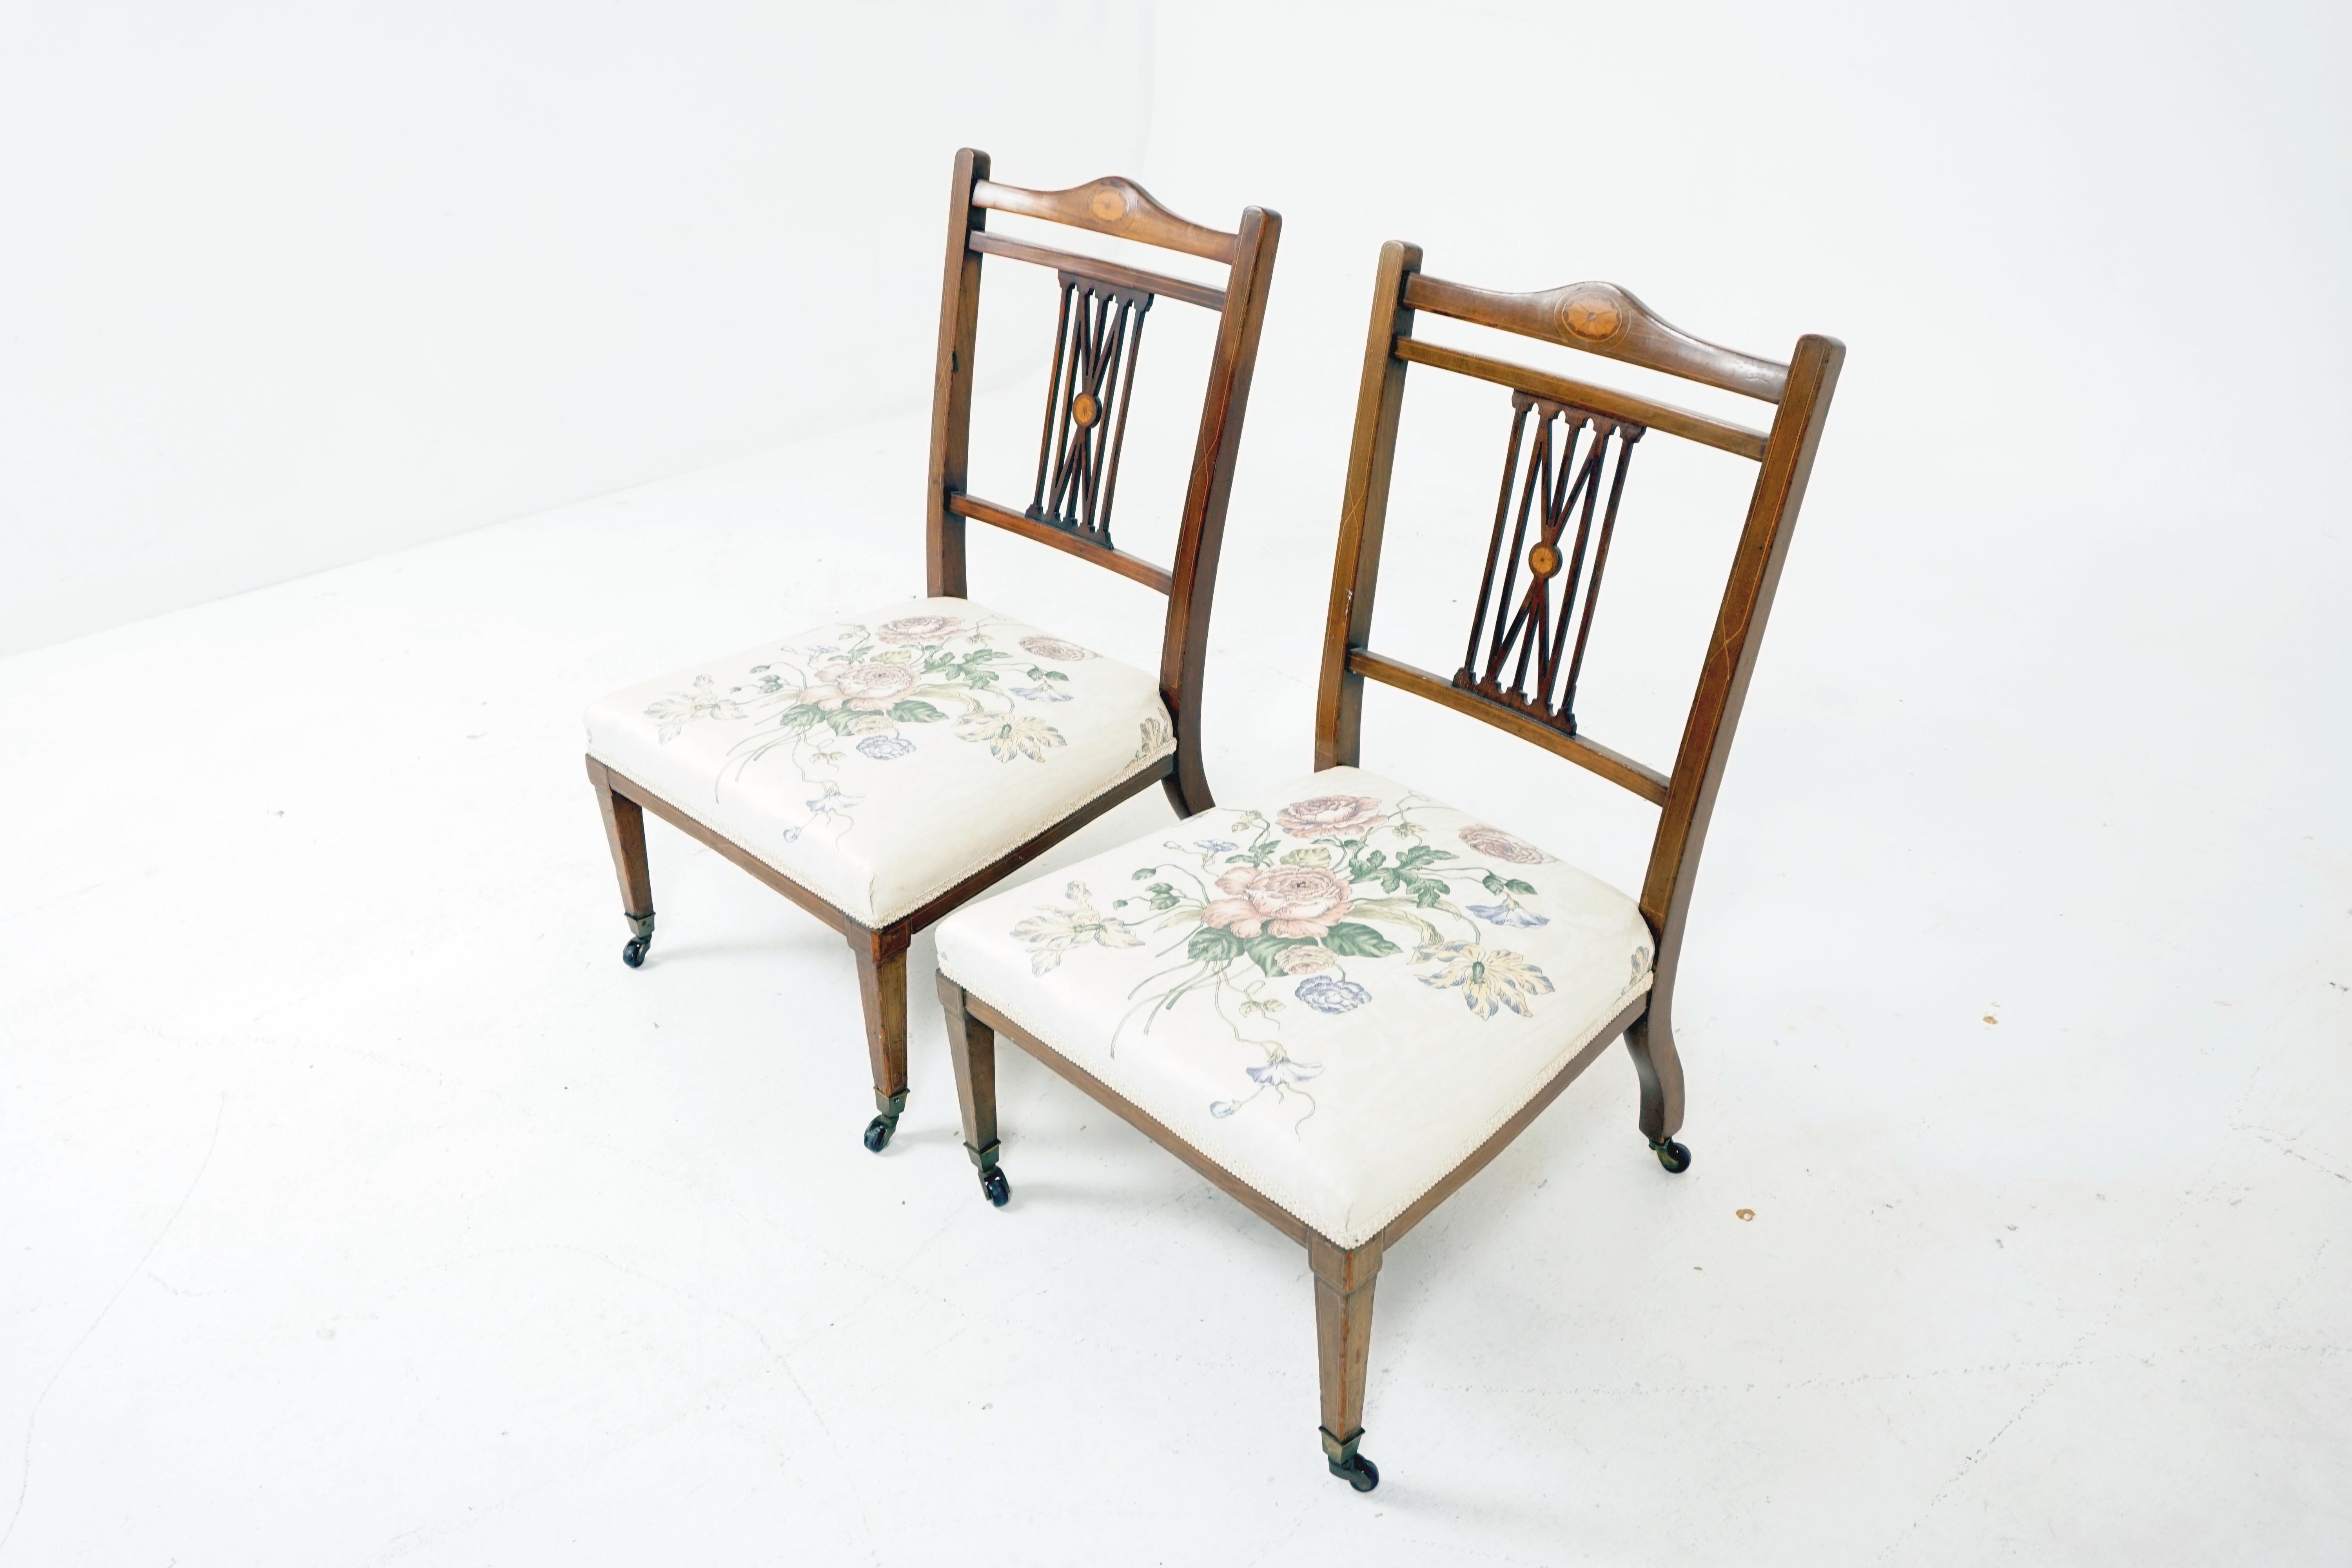 Pair of antique nursing chairs, Edwardian, inlaid walnut, Scotland 1910, H320

Scotland 1910
Solid Walnut And Veneers 
Original Finish
Neo Classical Design 
Pierced And Inlaid Top Rail 
Inlaid Back Splat 
Fine Stringing On Supports and